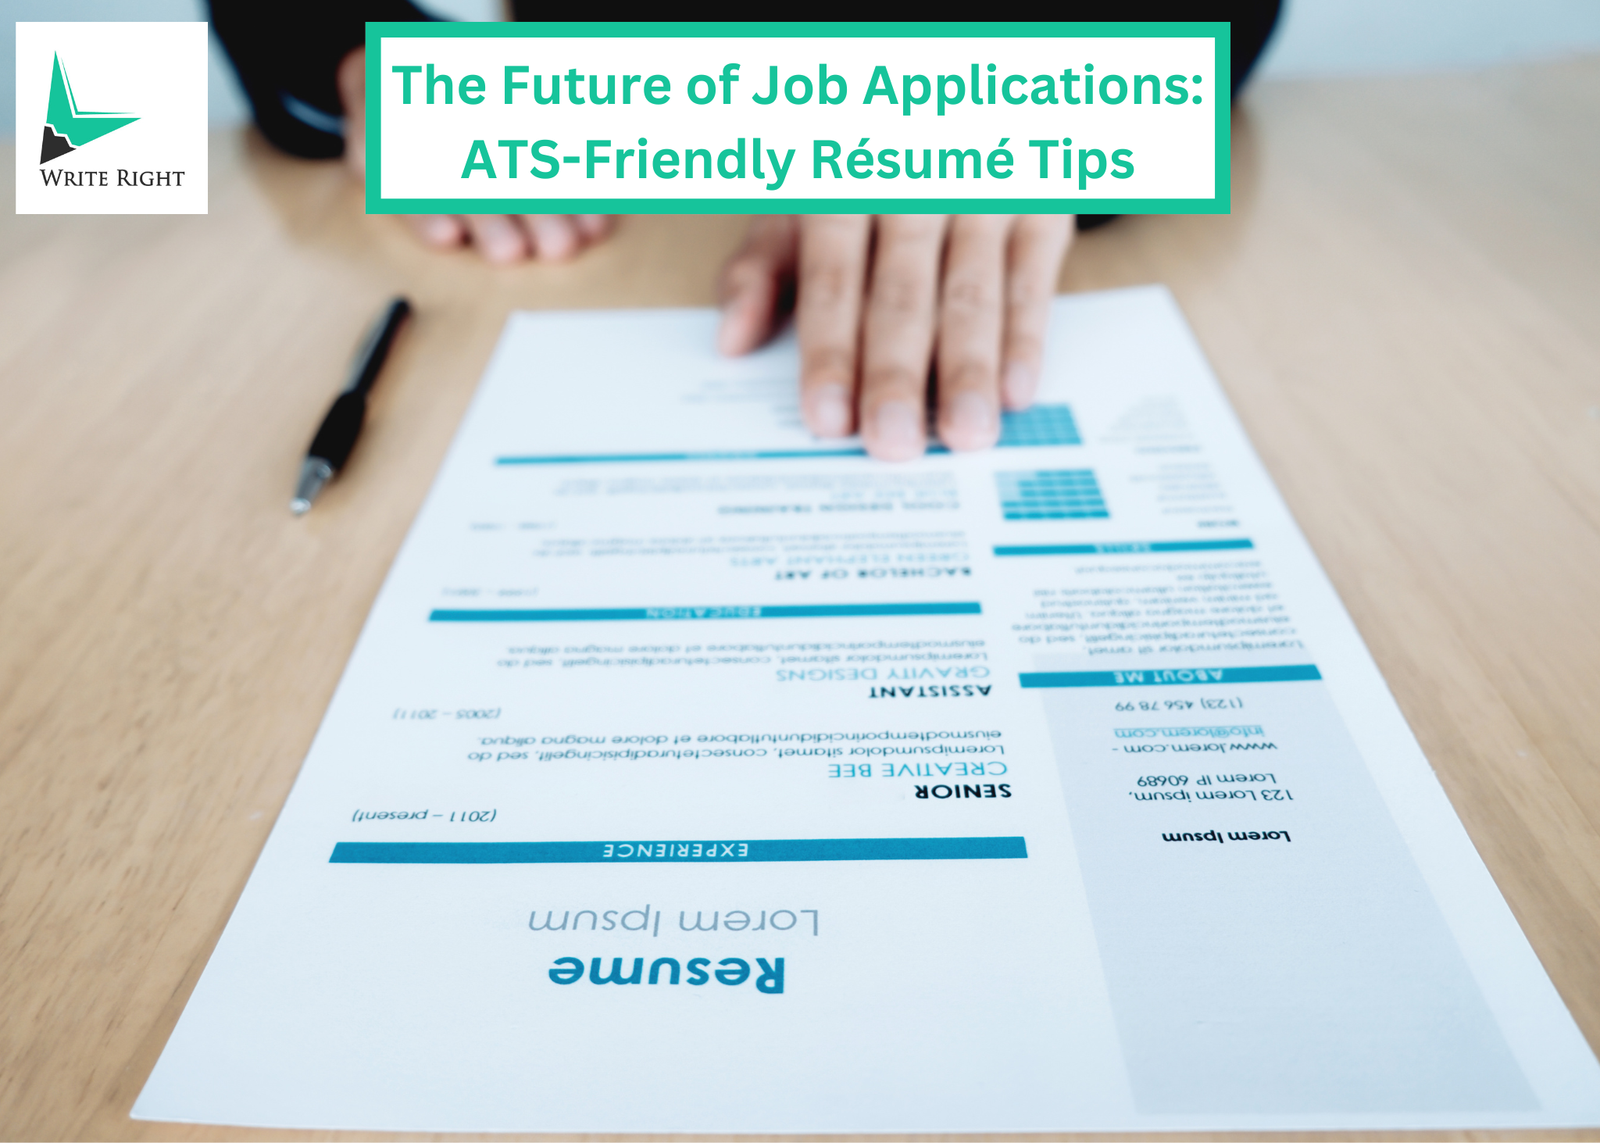 ATS-Friendly Resume: Tips by Top 5 Resume Writing Services